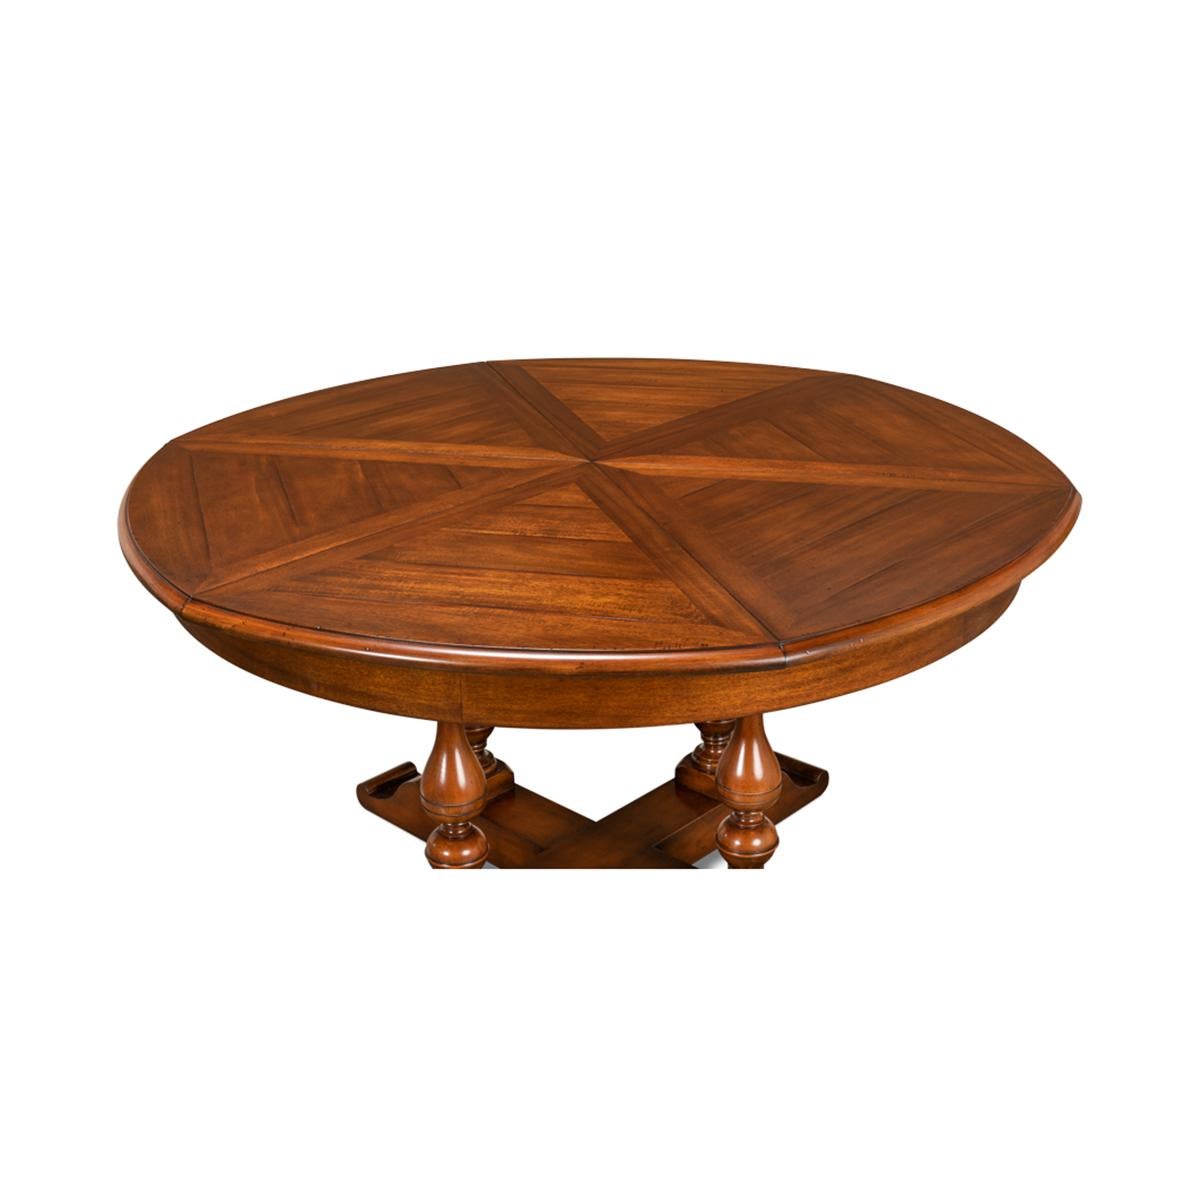 Early English Style Round Extension Dining Table, 70